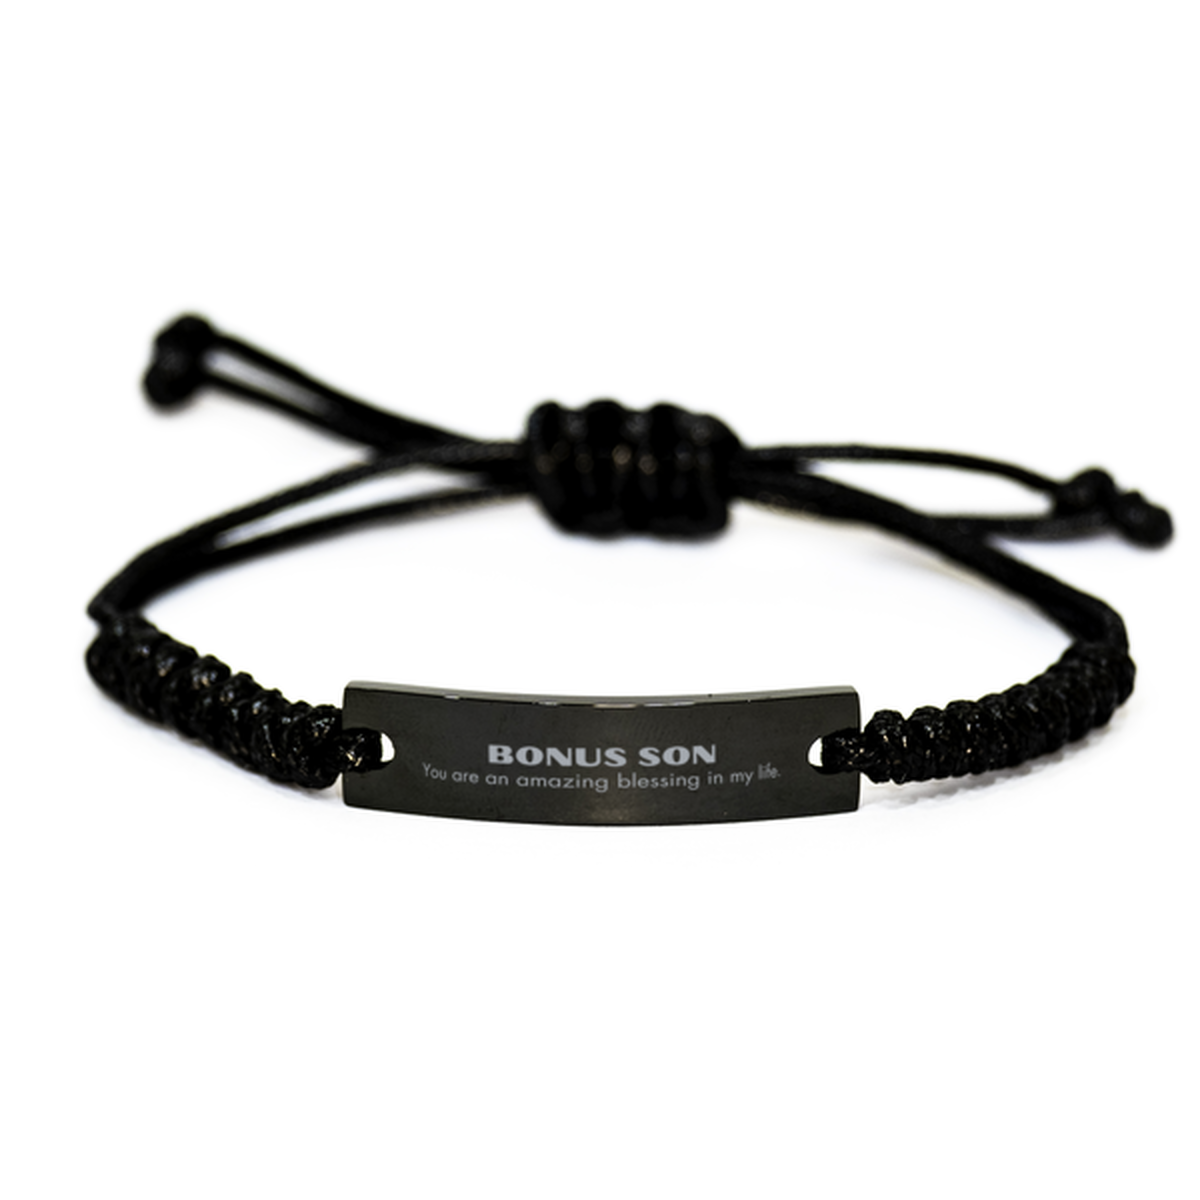 Bonus Son Black Rope Bracelet, You are an amazing blessing in my life, Thank You Gifts For Bonus Son, Inspirational Birthday Christmas Unique Gifts For Bonus Son